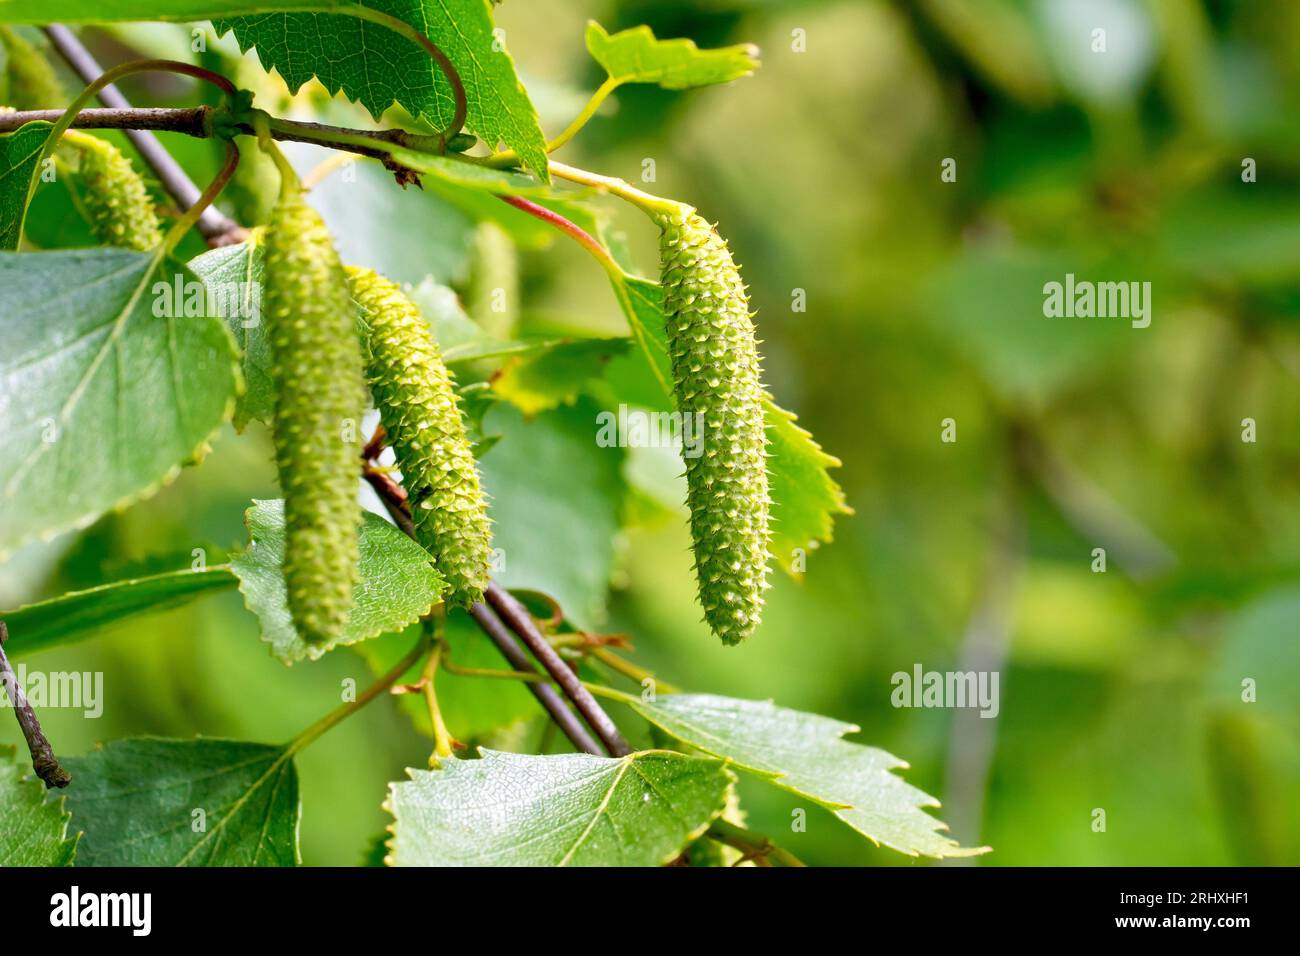 Silver Birch (betula pendula), close up showing the developing seed pods or catkins hanging amongst the leaves of the tree in the late spring. Stock Photo